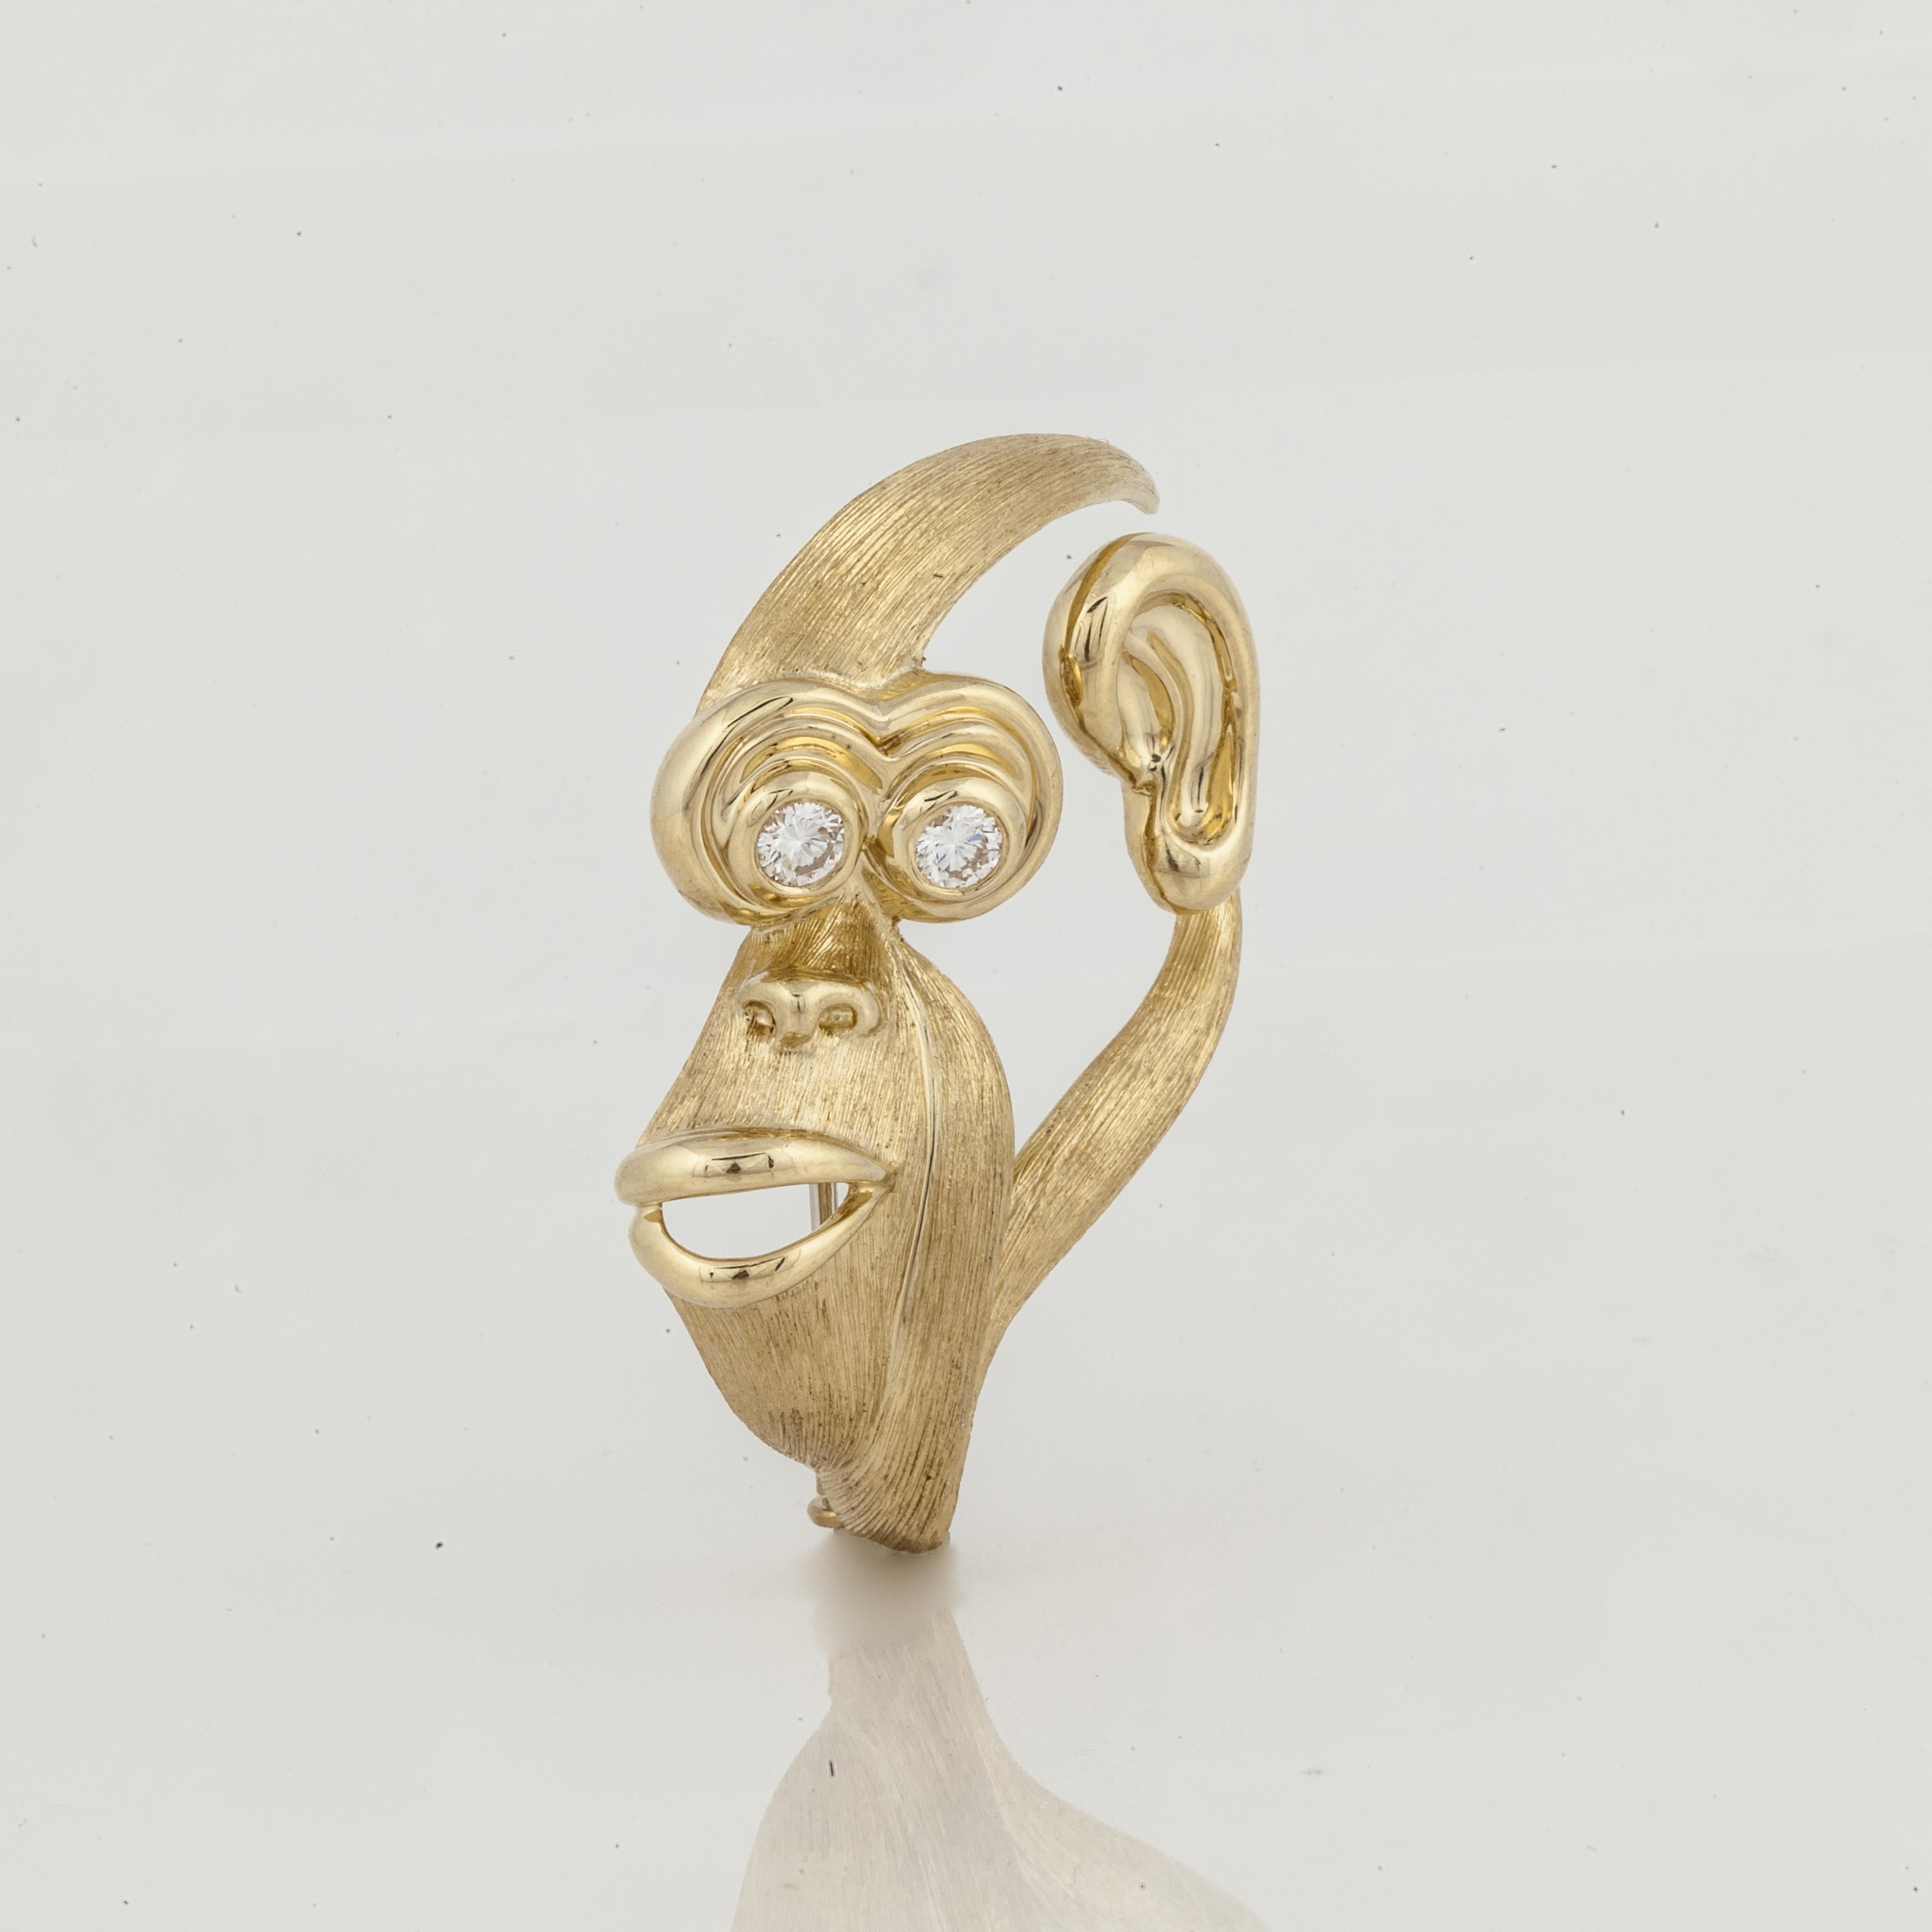 This Henry Dunay brooch depicts the profile of a monkey's face in 18K yellow gold with both a high polish and Sabi finish.  It is marked 